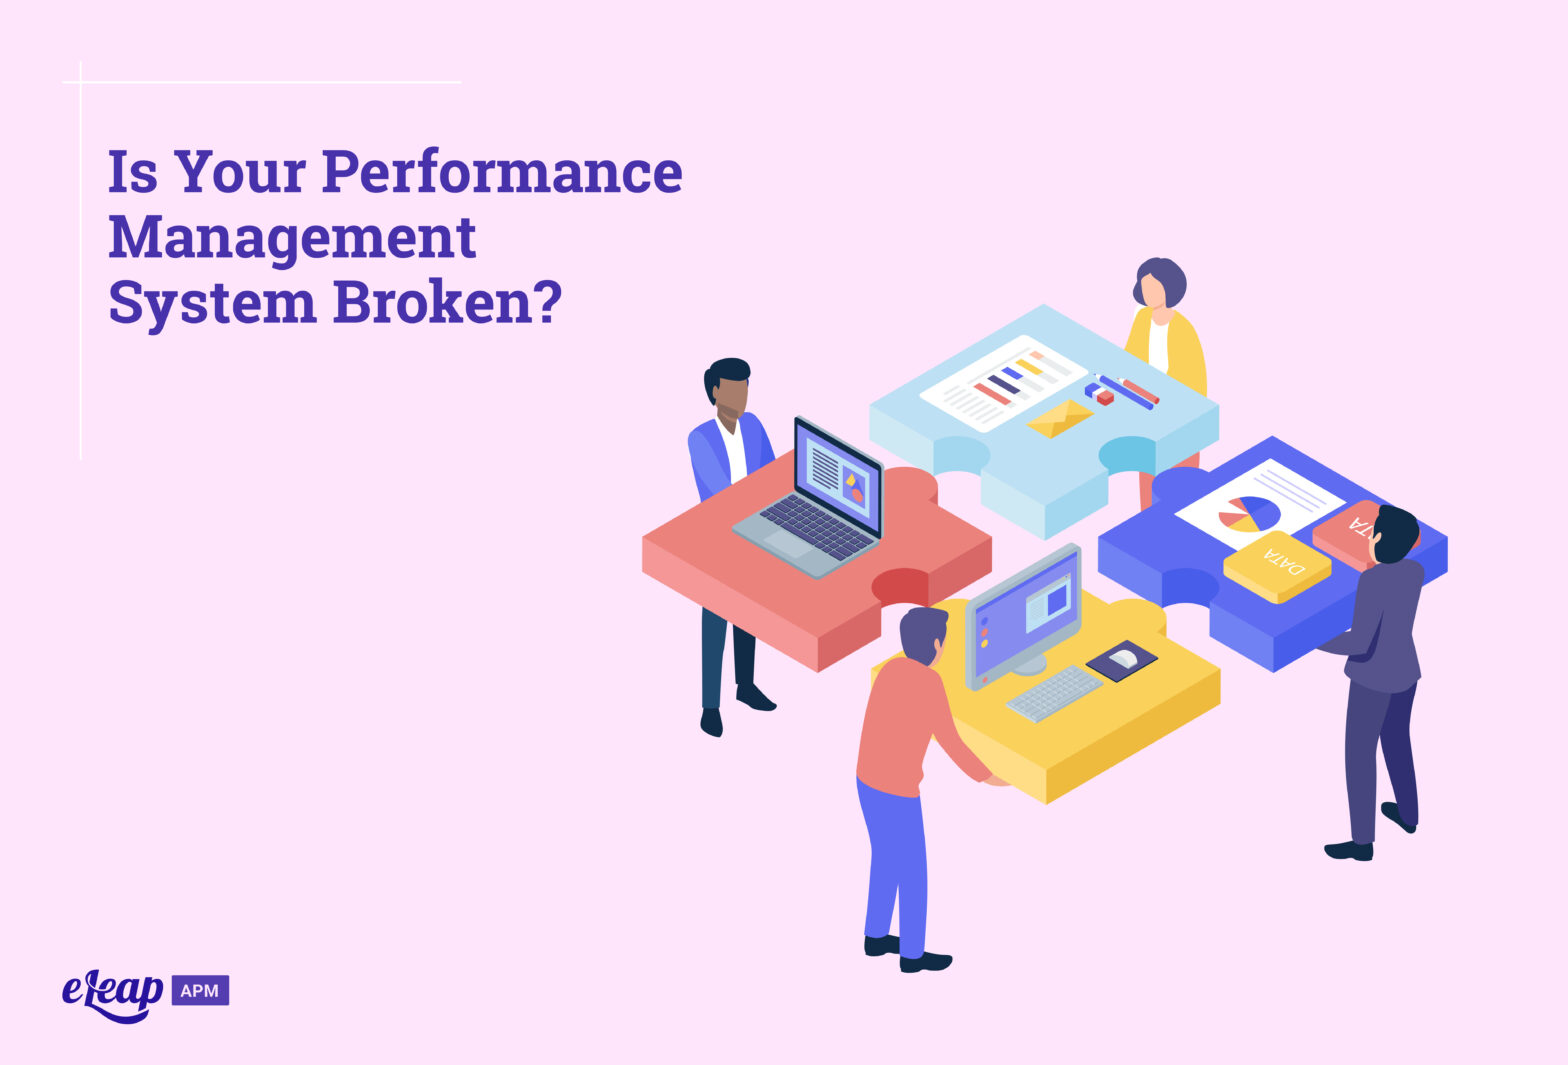 Is Your Performance Management System Broken?